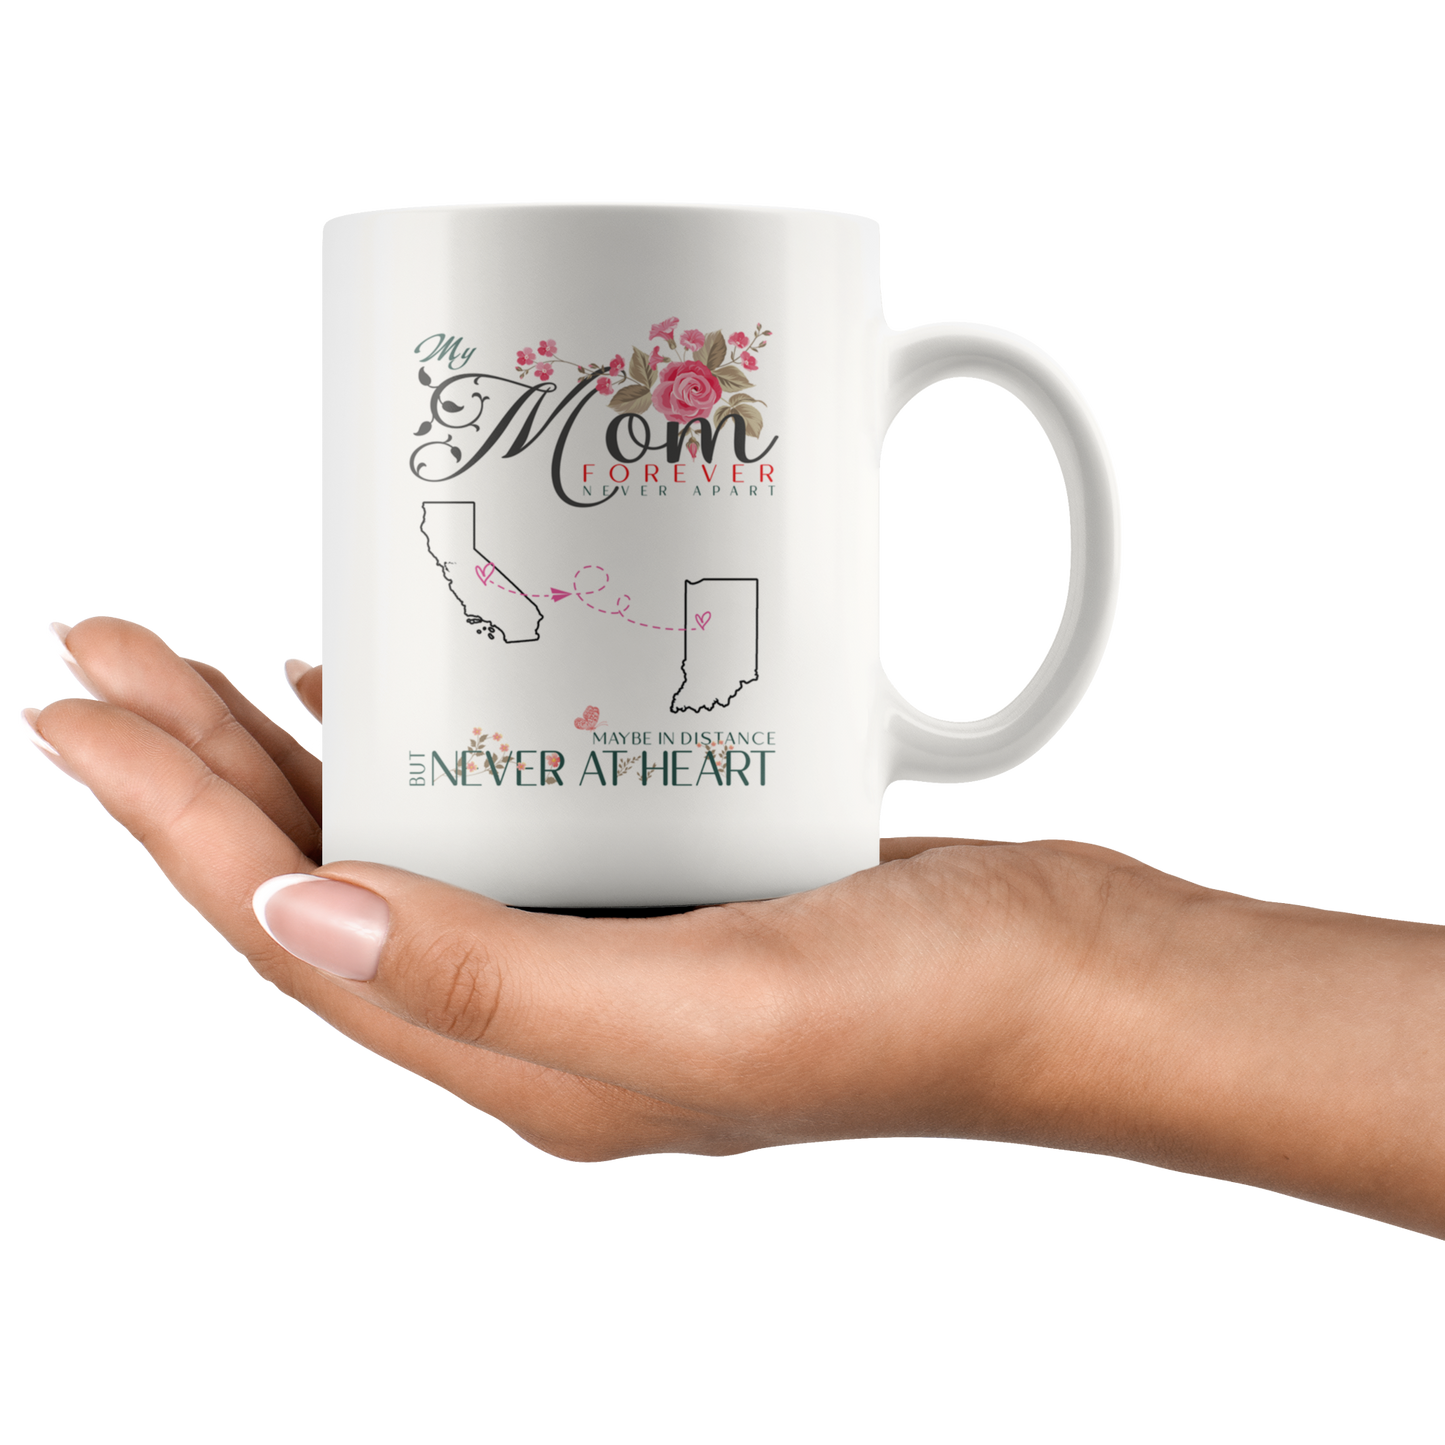 M-20321571-sp-23659 - [ California | Indiana ]Personalized Mothers Day Coffee Mug - My Mom Forever Never A